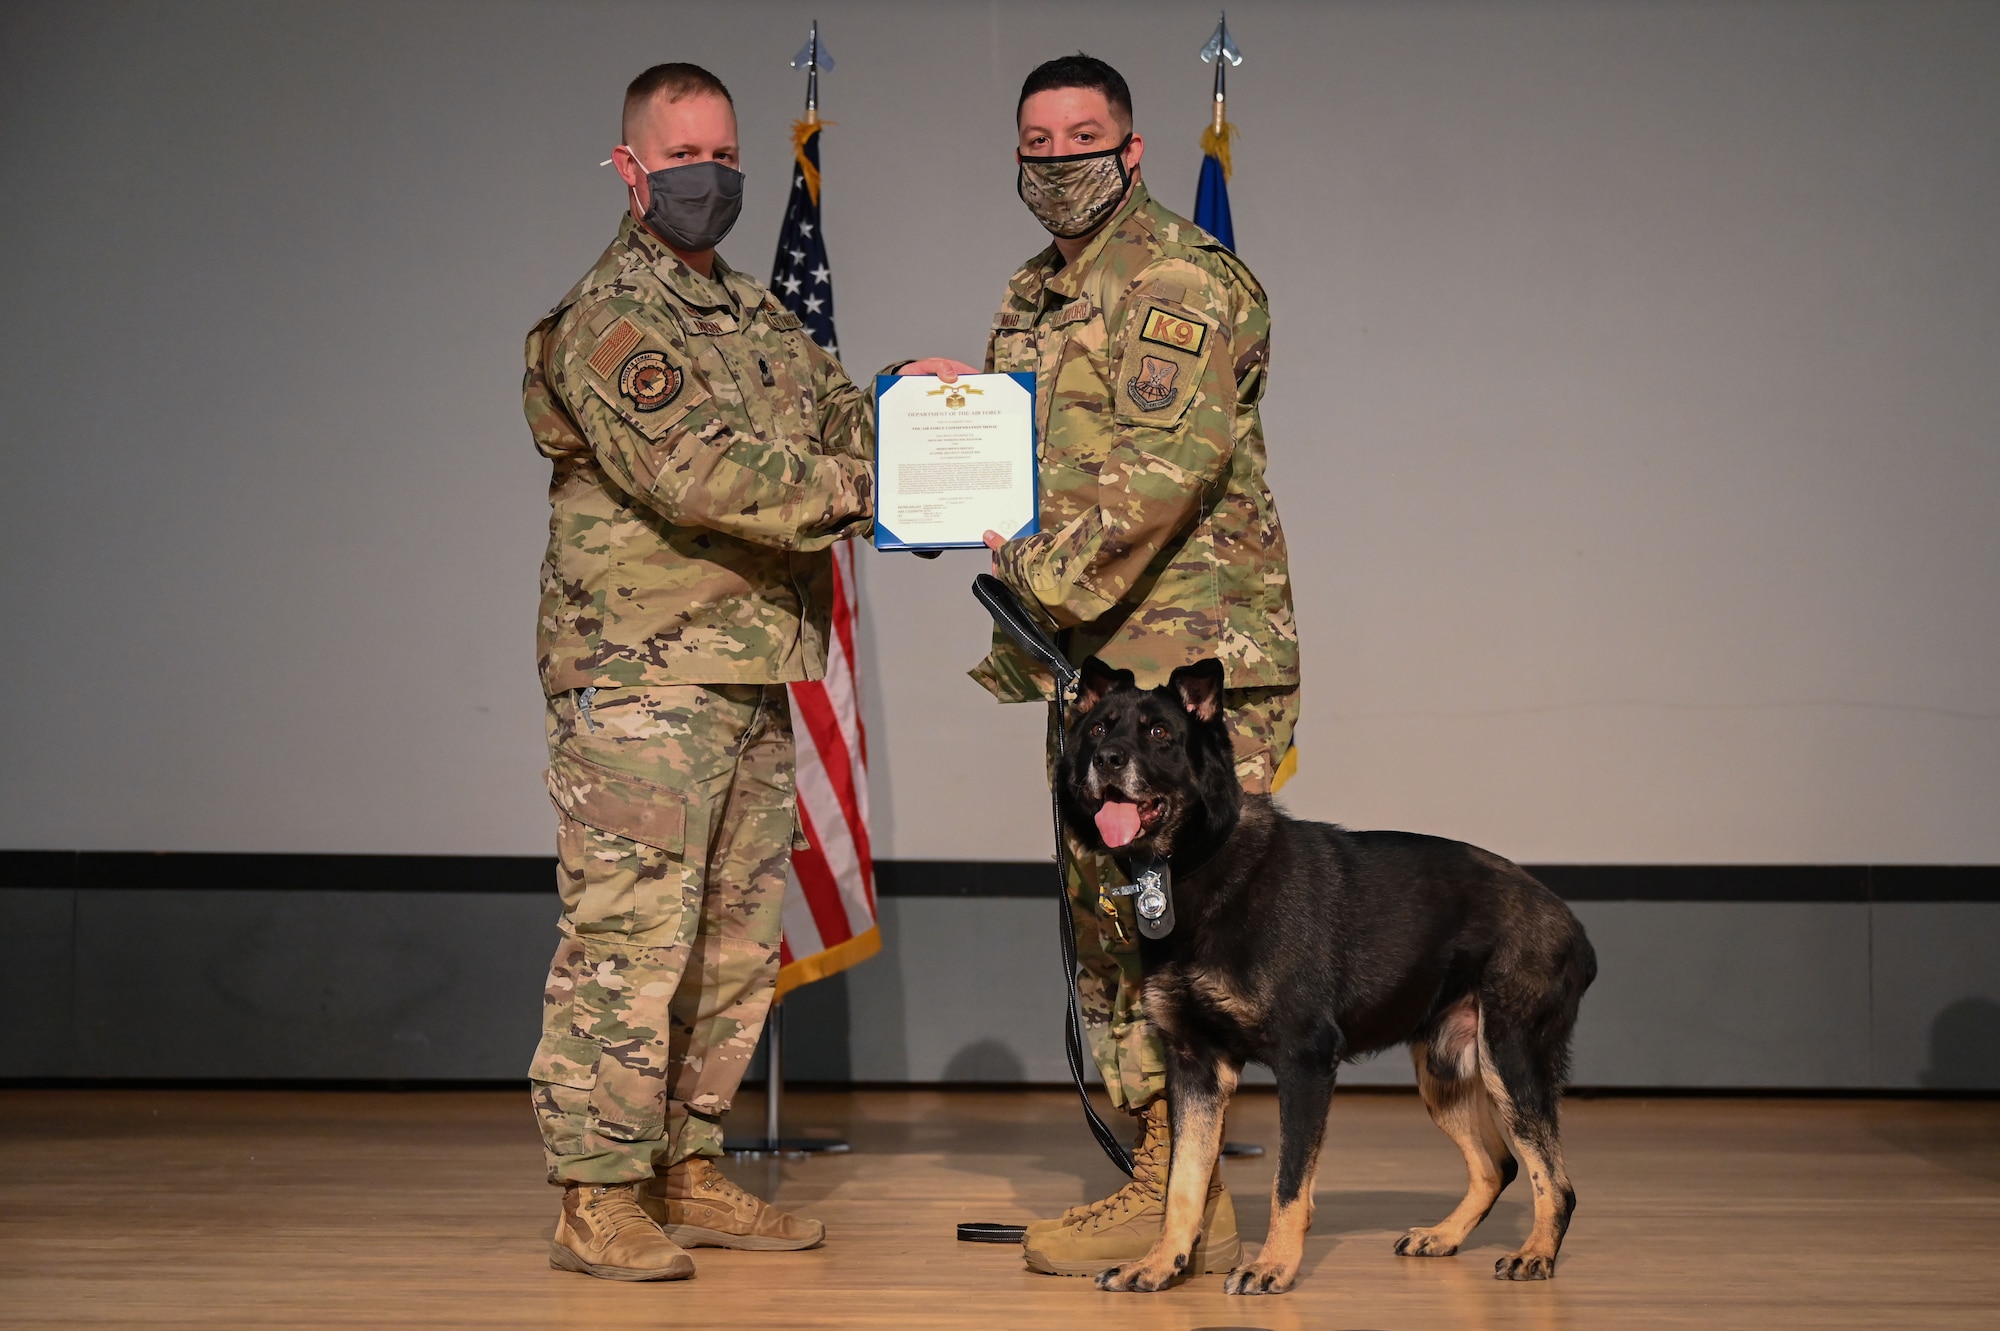 U.S. Air Force Staff Sgt. Matthew Mead, 377th Security Forces Squadron Military Working Dog handler, accepts a commendation for MWD Baxi from Lt. Col. Adam Morgan, 377th SFS commander, during a retirement ceremony at Kirtland Air Force Base, N.M., Aug. 27, 2021.